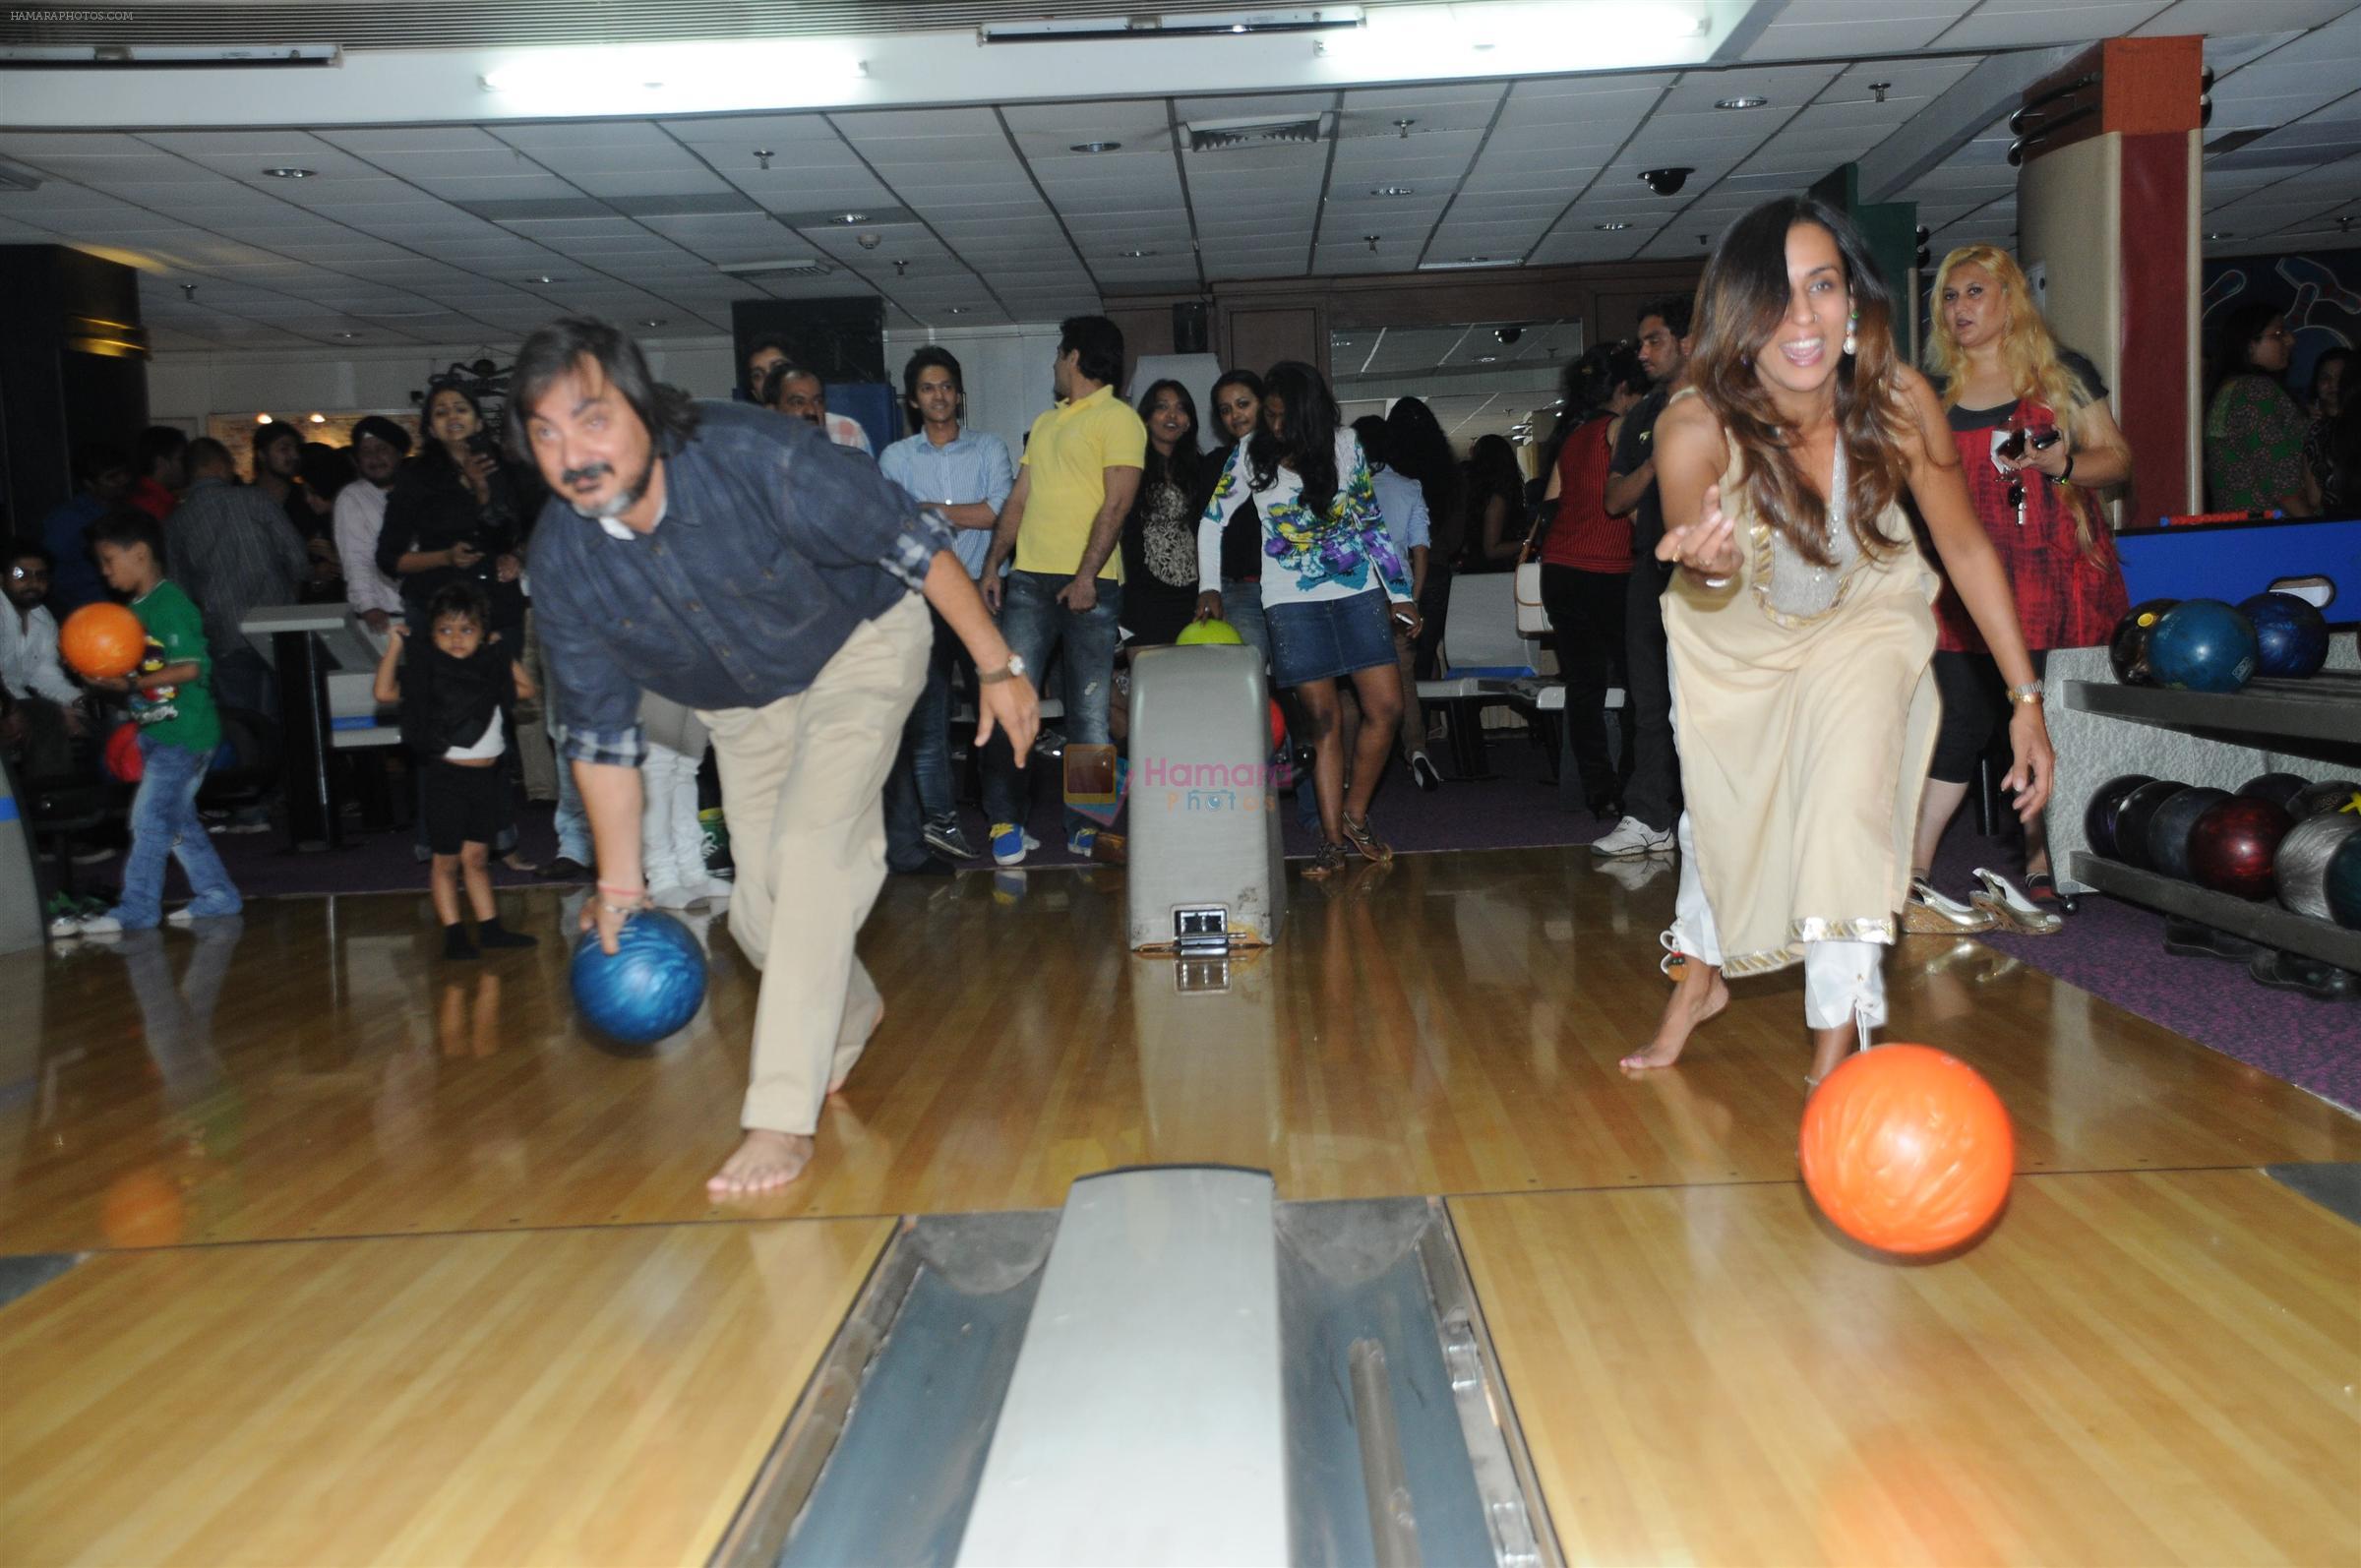 Tony and Deeya Singh Bowling at the Celebration of the Completion Party of 100 Episodes of PARVARISH kuch khatti kuch meethi in bowling alley on 7th April 2012